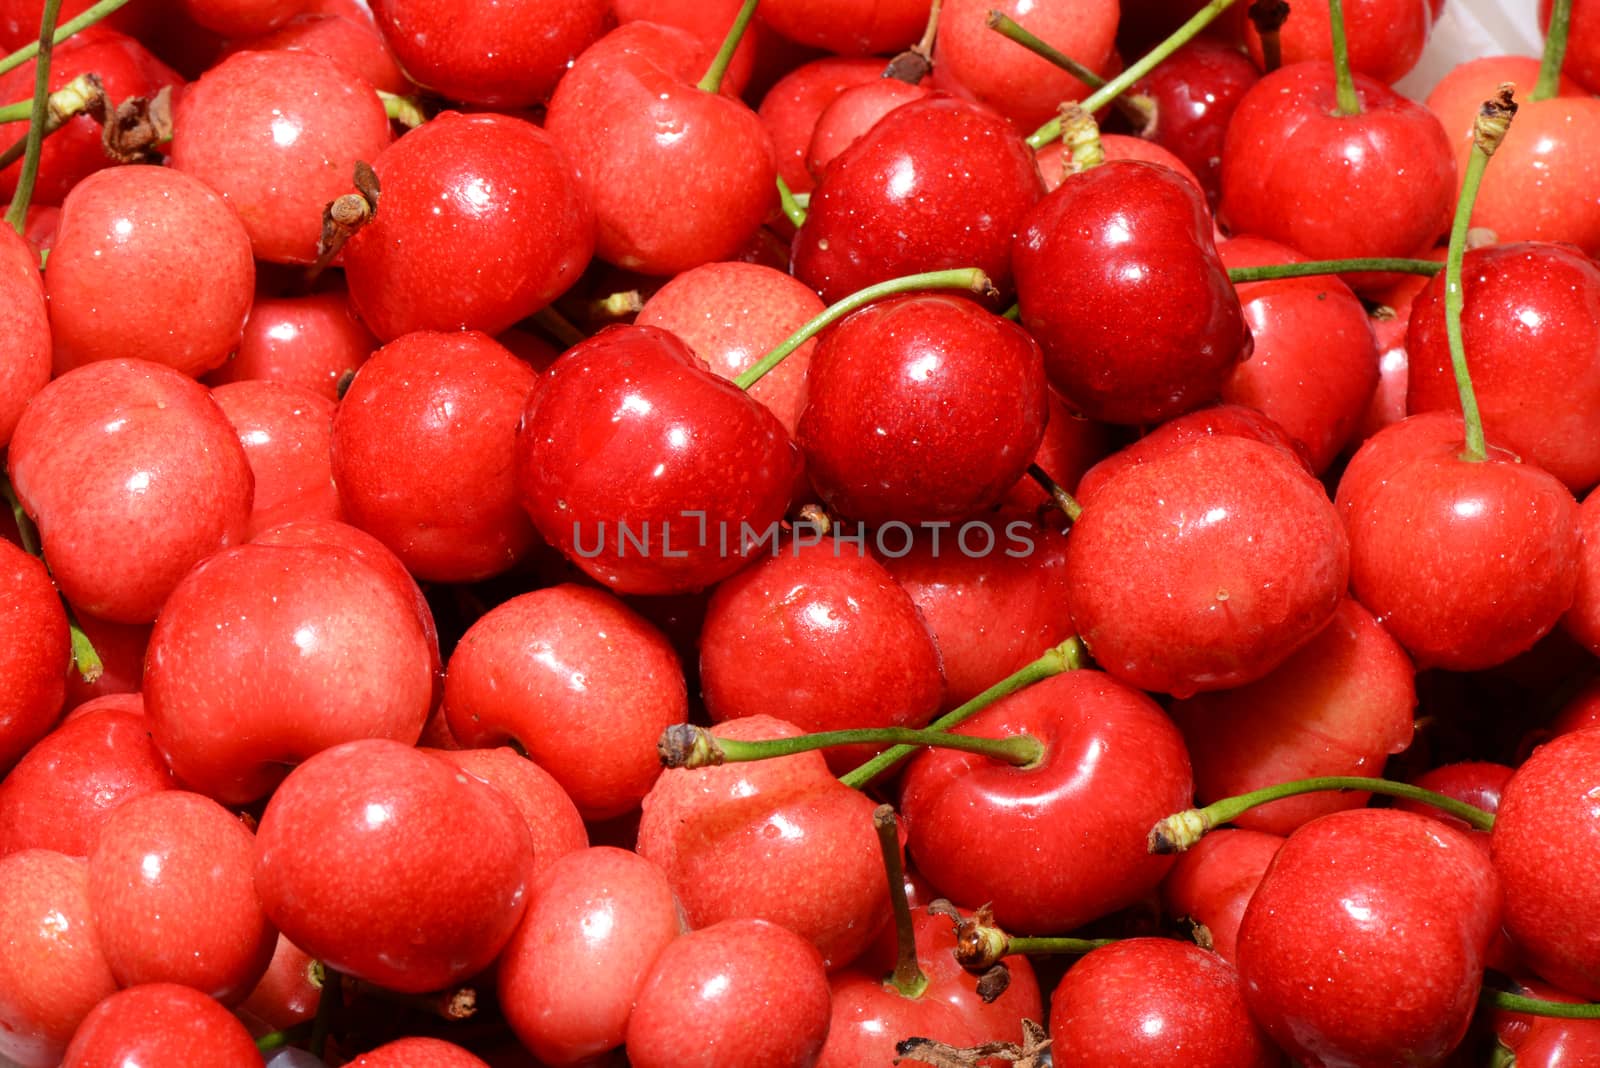 Many sweet cherries as a background